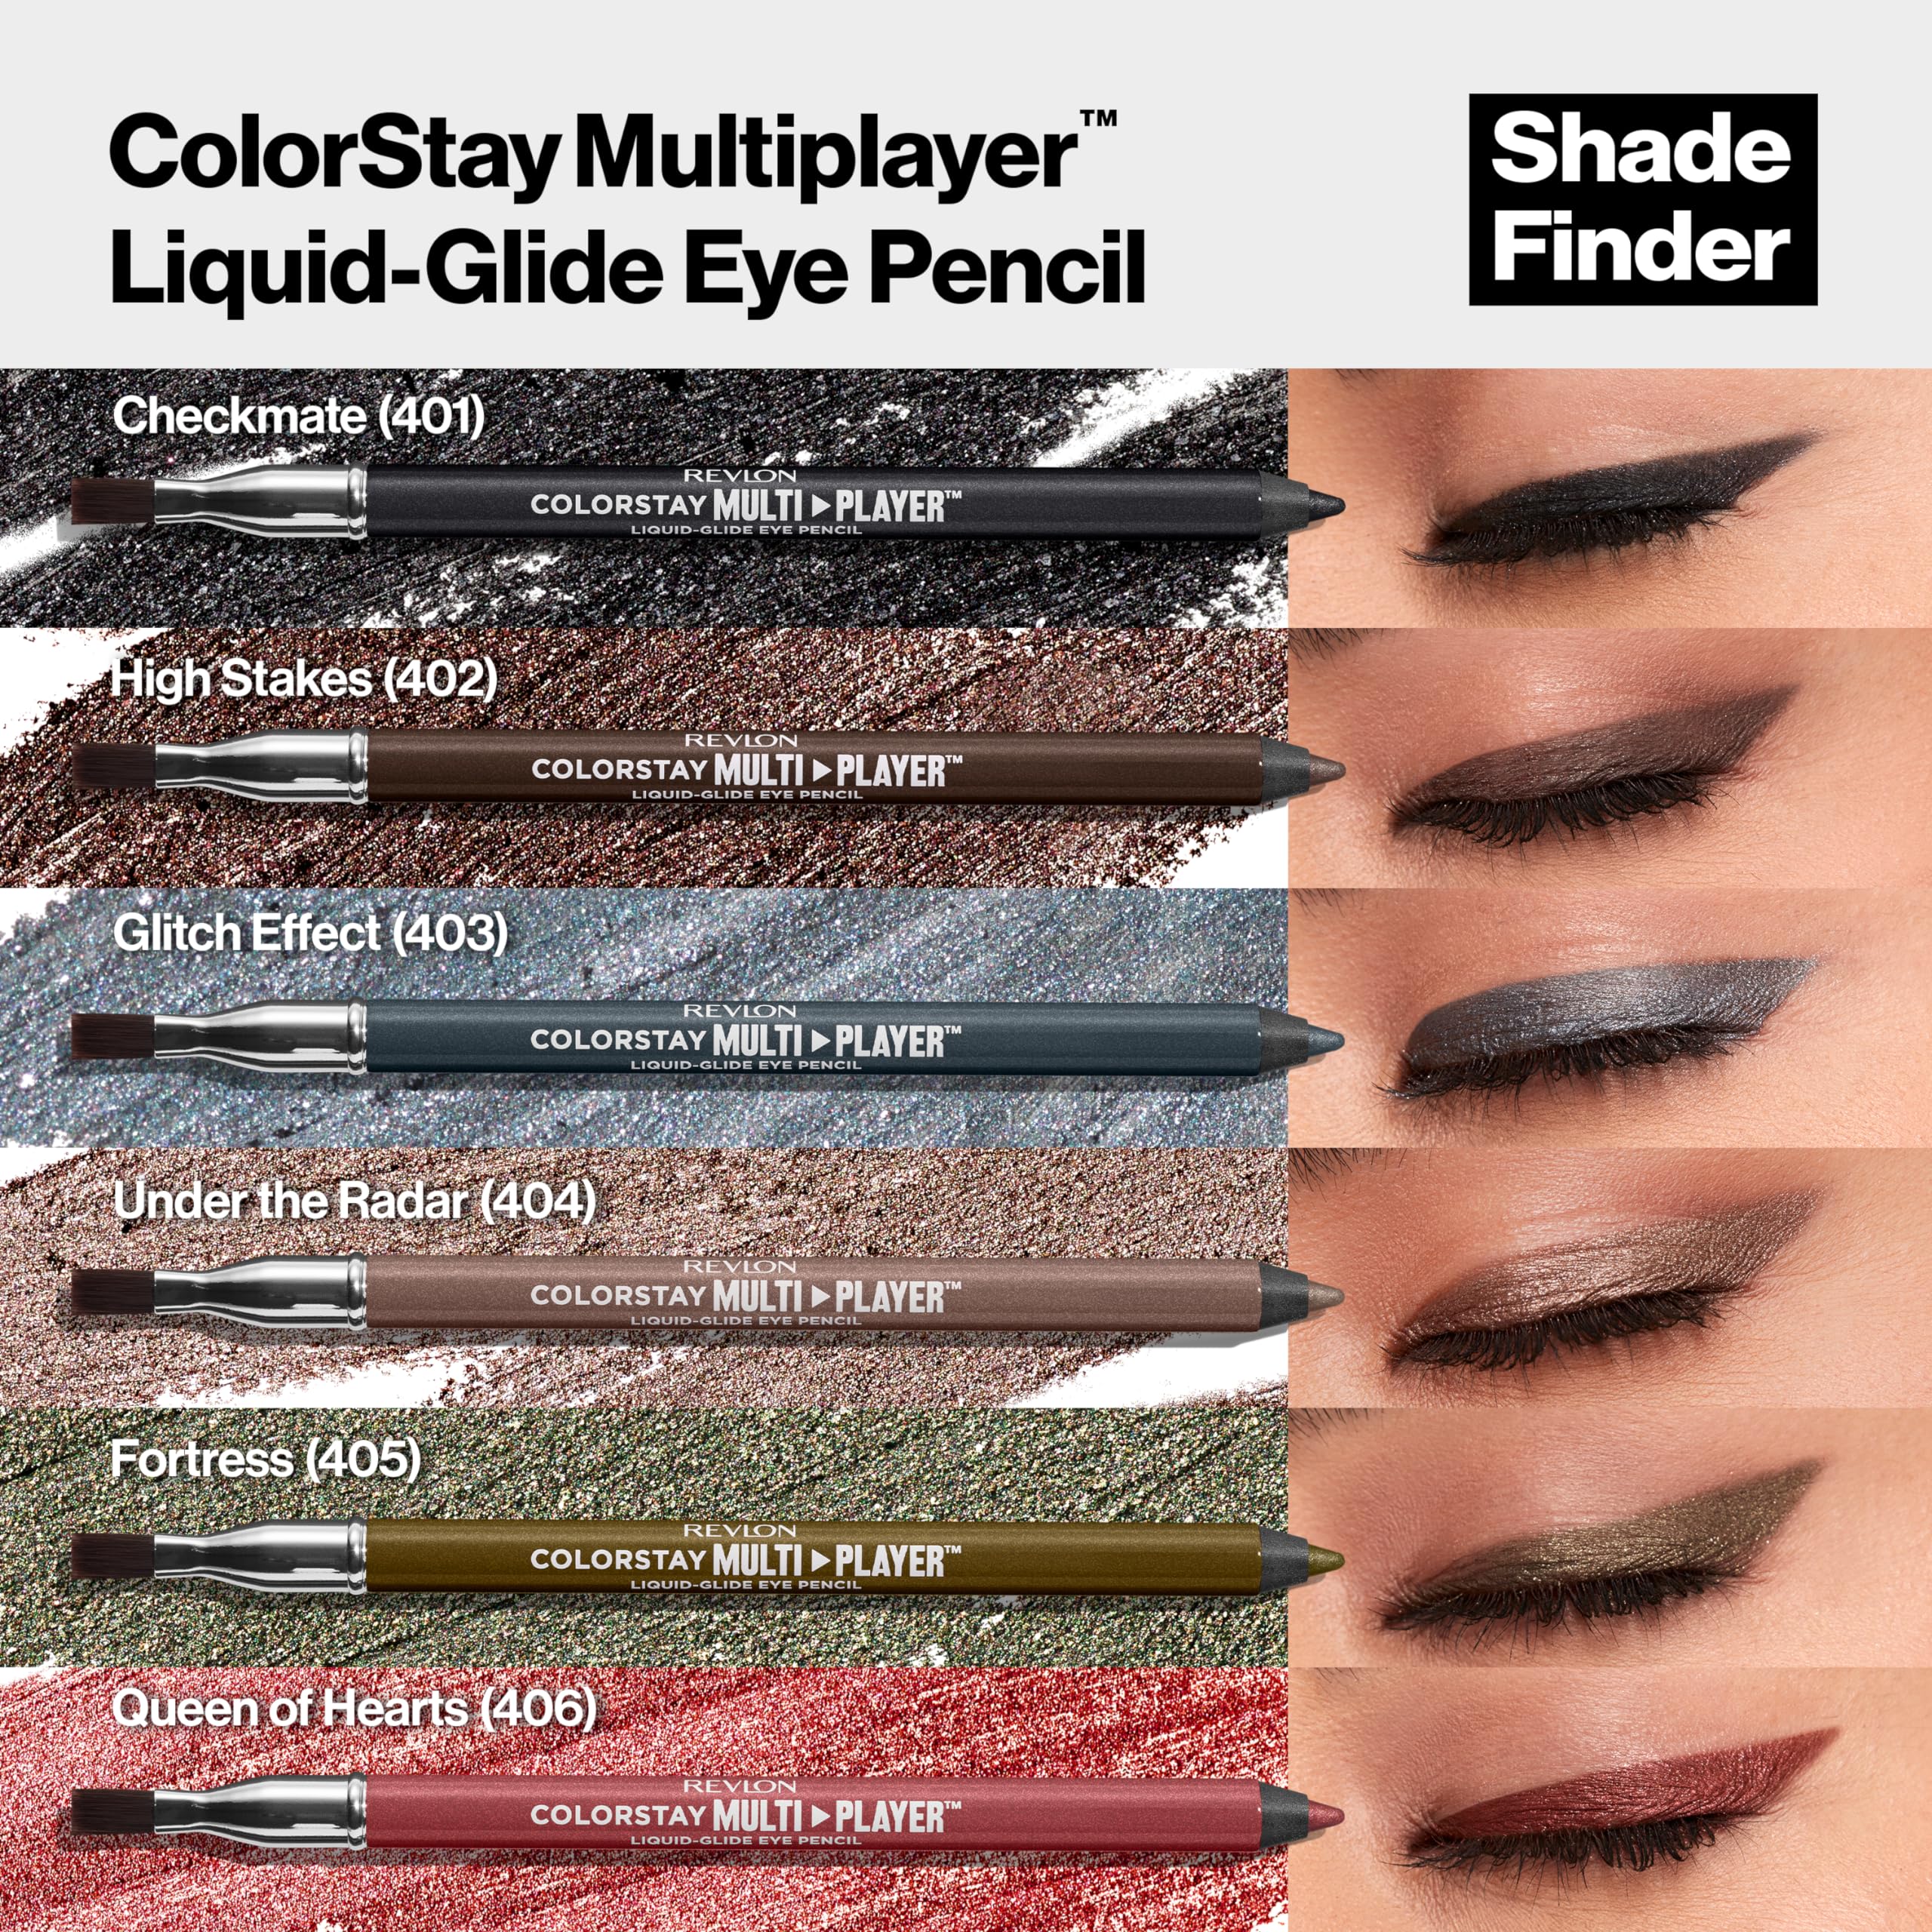 REVLON ColorStay Multiplayer Liquid-Glide Eye Pencil, Multi-Use Eye Makeup With Blending Brush, Blends Then Sets, Creamy Texture, Waterproof, Smudge-proof, Longwearing, 402 High Stakes, 0.03 oz